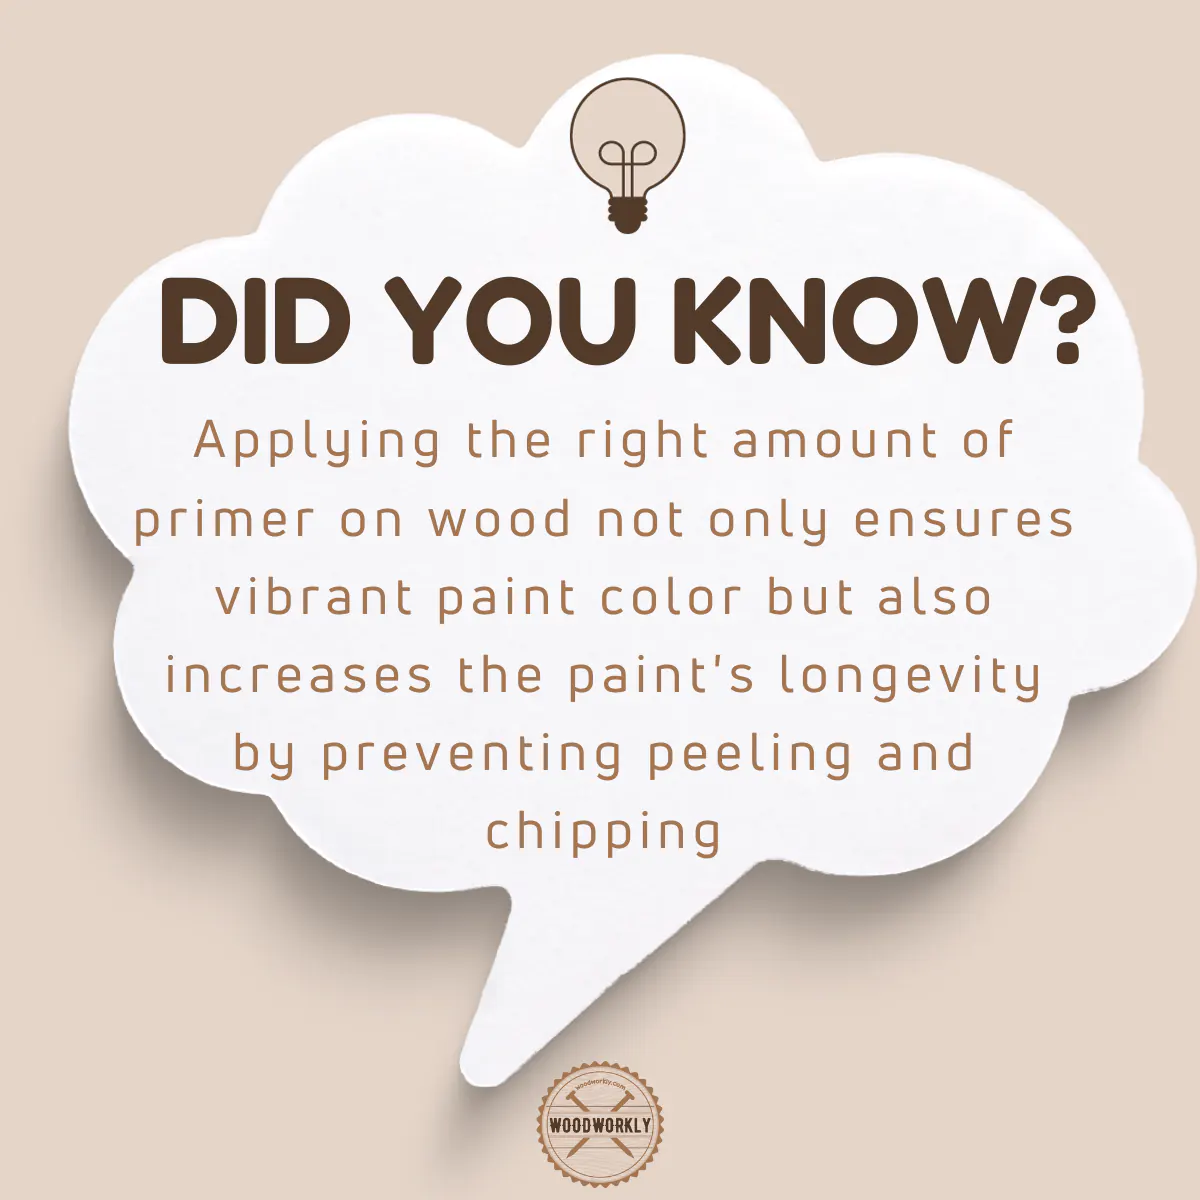 Did you know fact about applying primer coats on wood